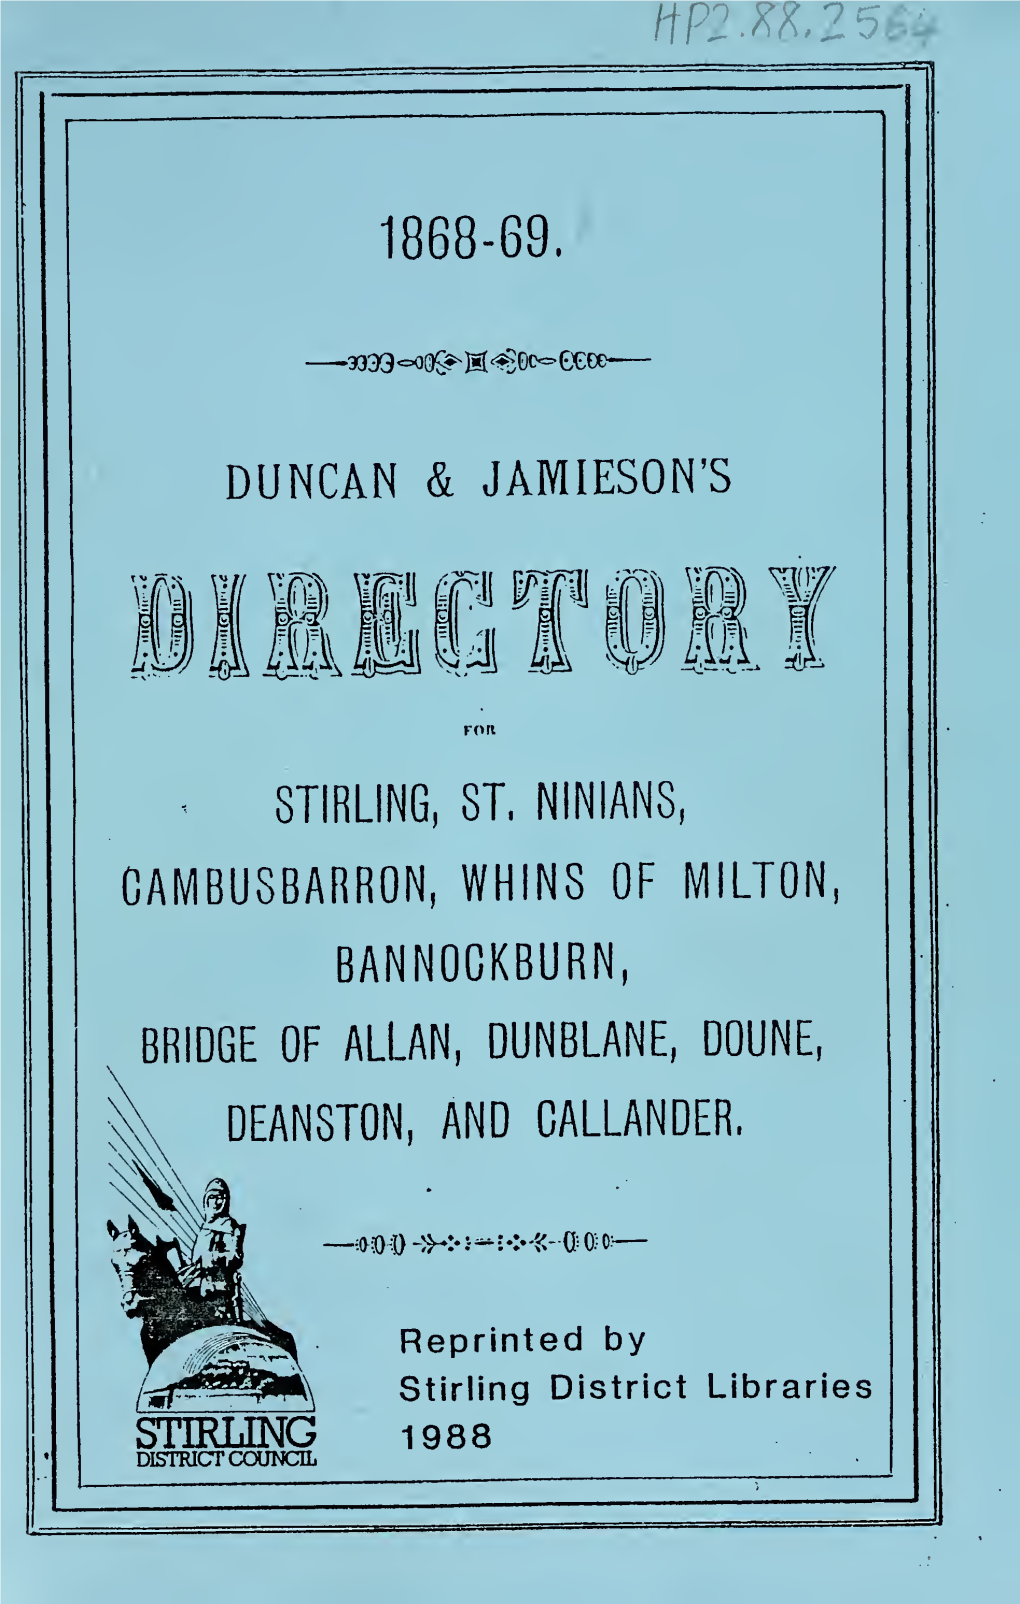 Duncan & Jamieson's Directory for Stirling, St. Ninians, Cambusbarron